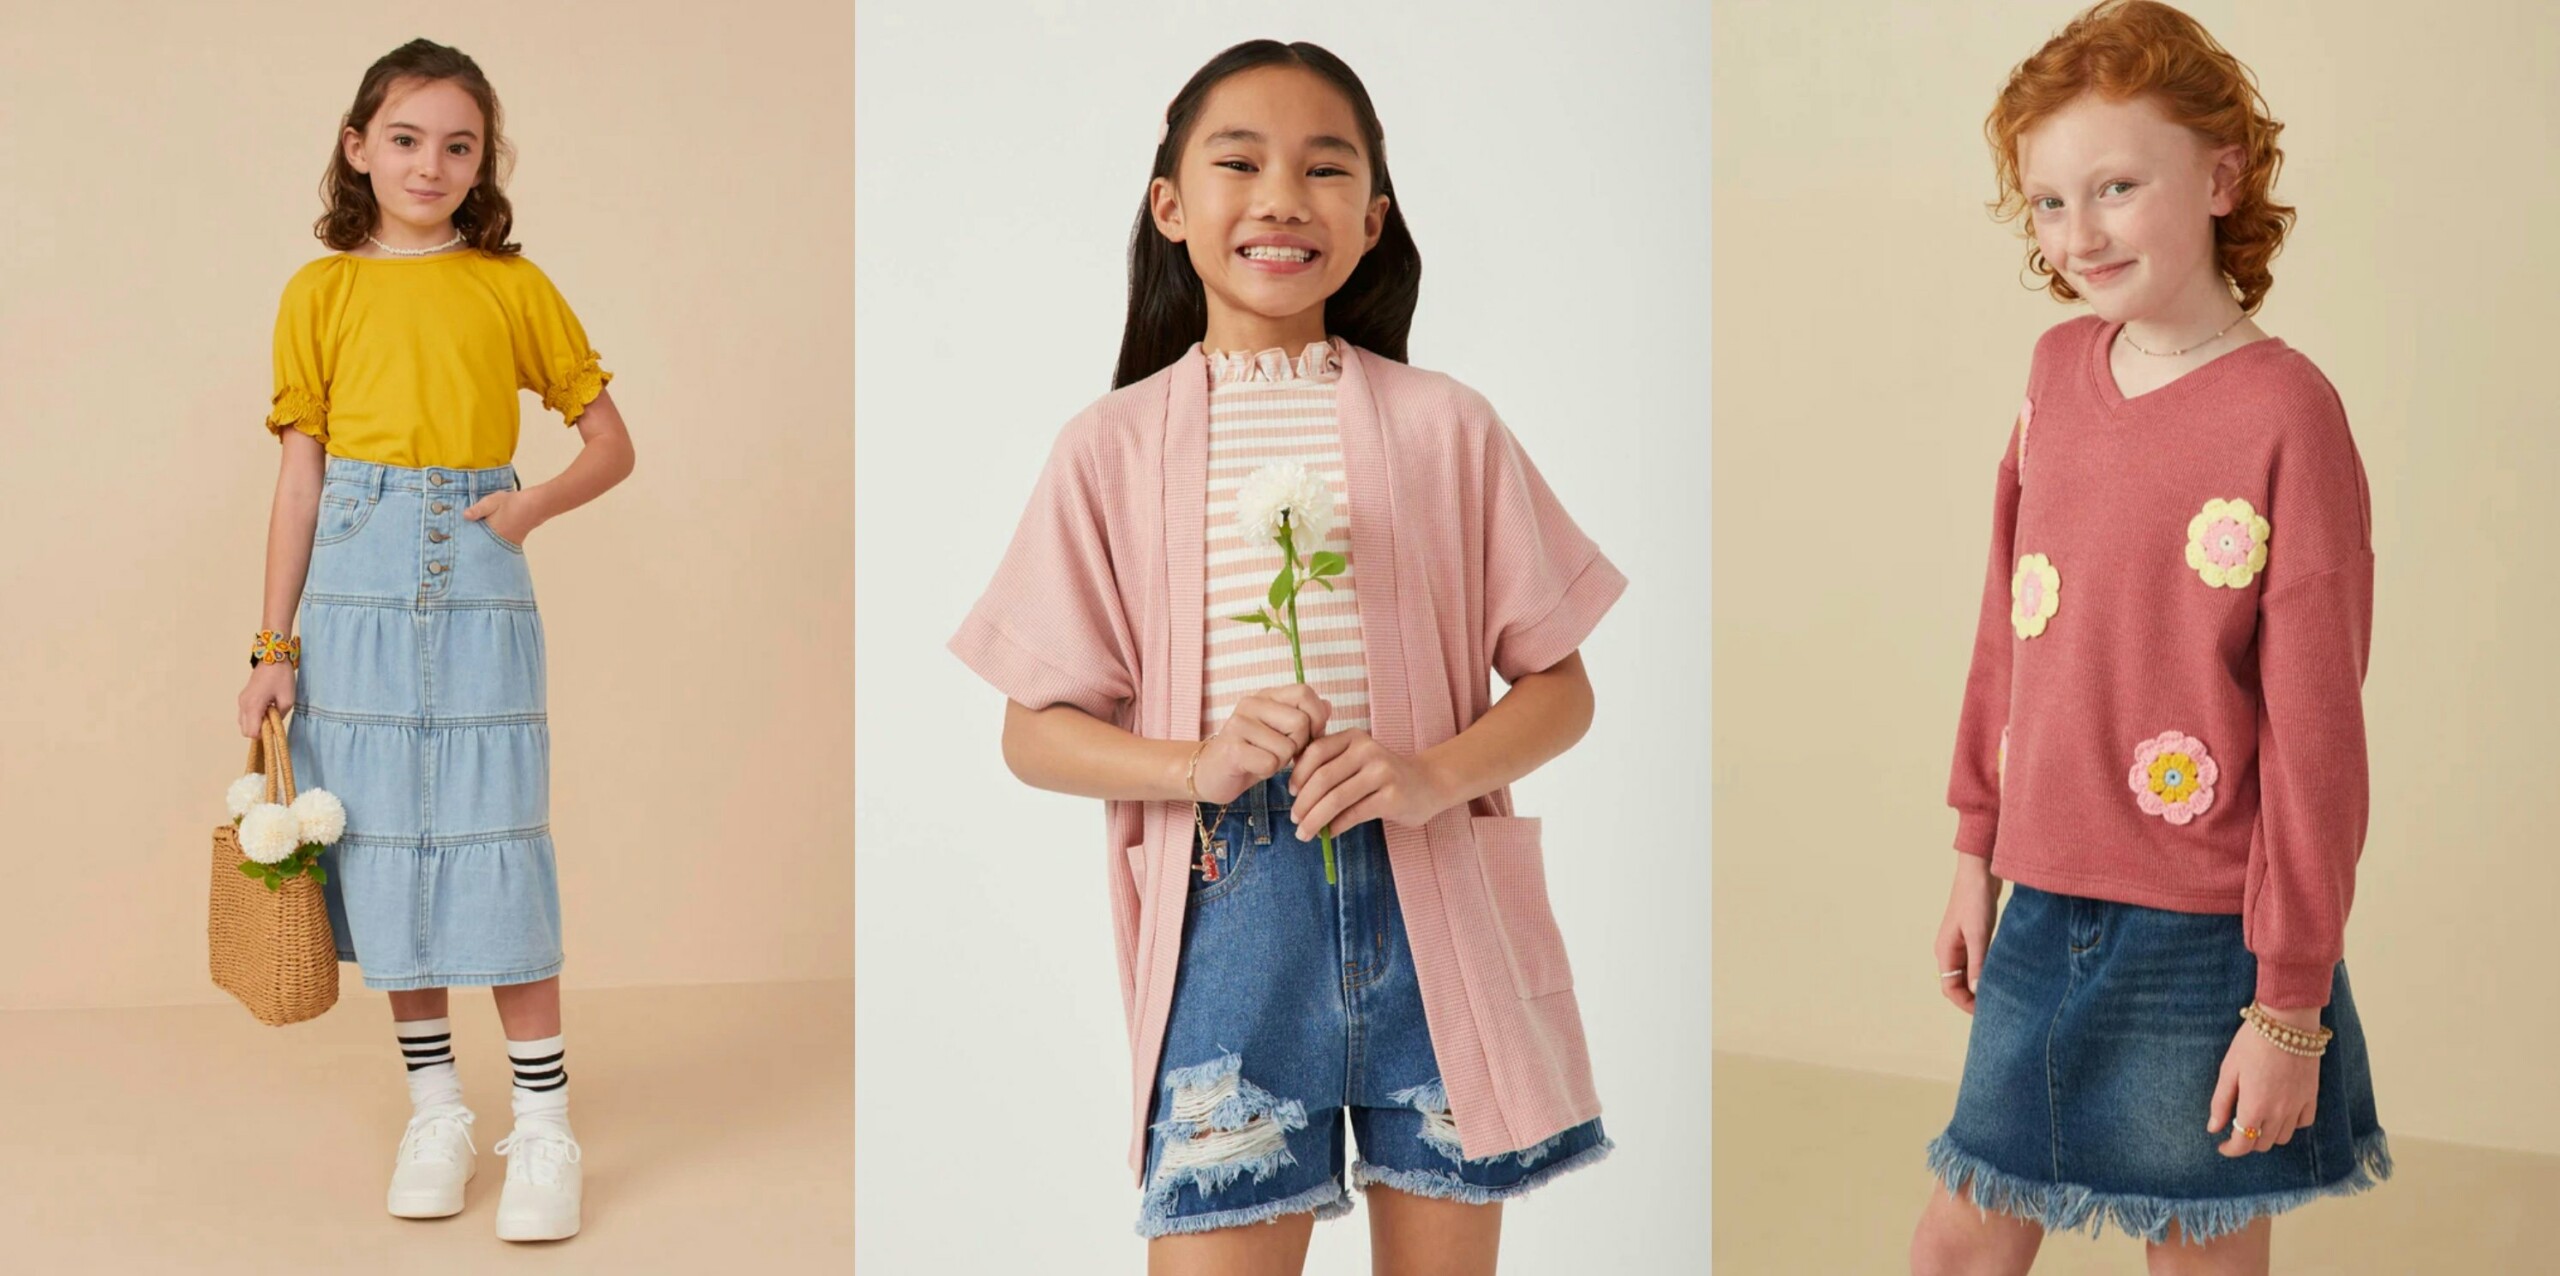 10 Comfy, Stylish Pieces Your Tween Will Want To Live In This Spring